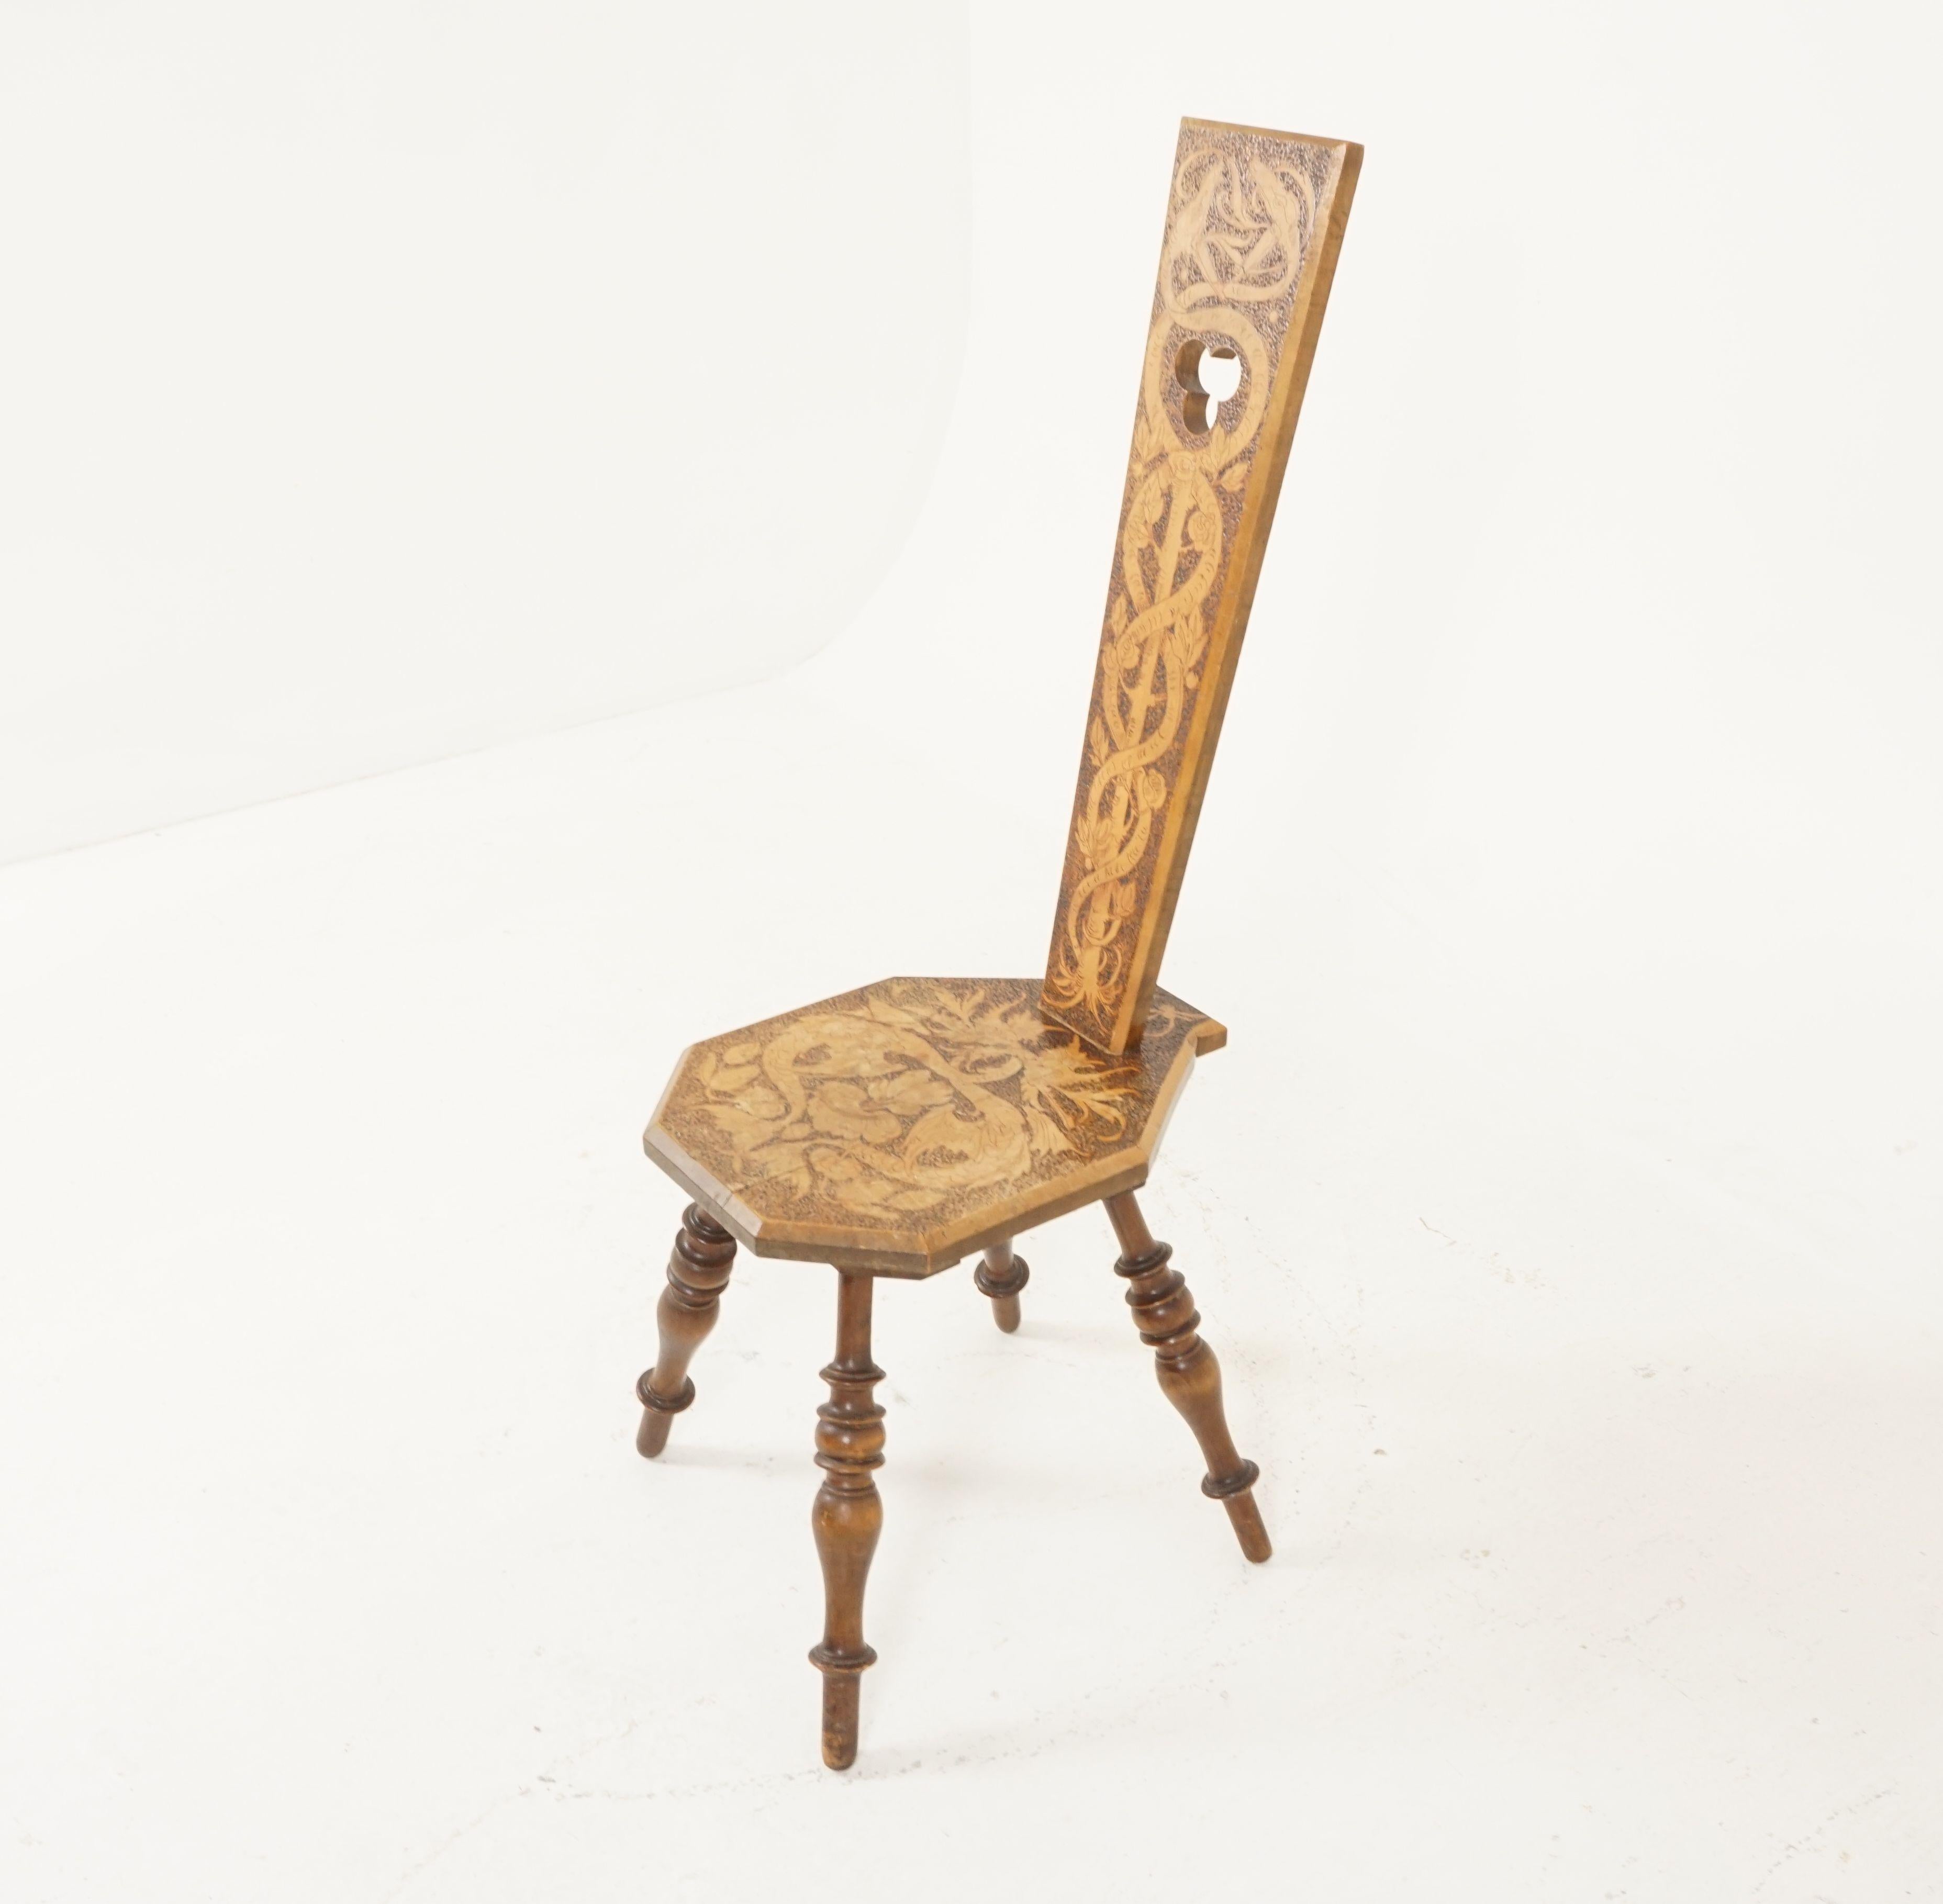 Hand-Crafted Antique Arts + Crafts Chair, Poker Work Spinning Chair, Scotland 1910, B2205